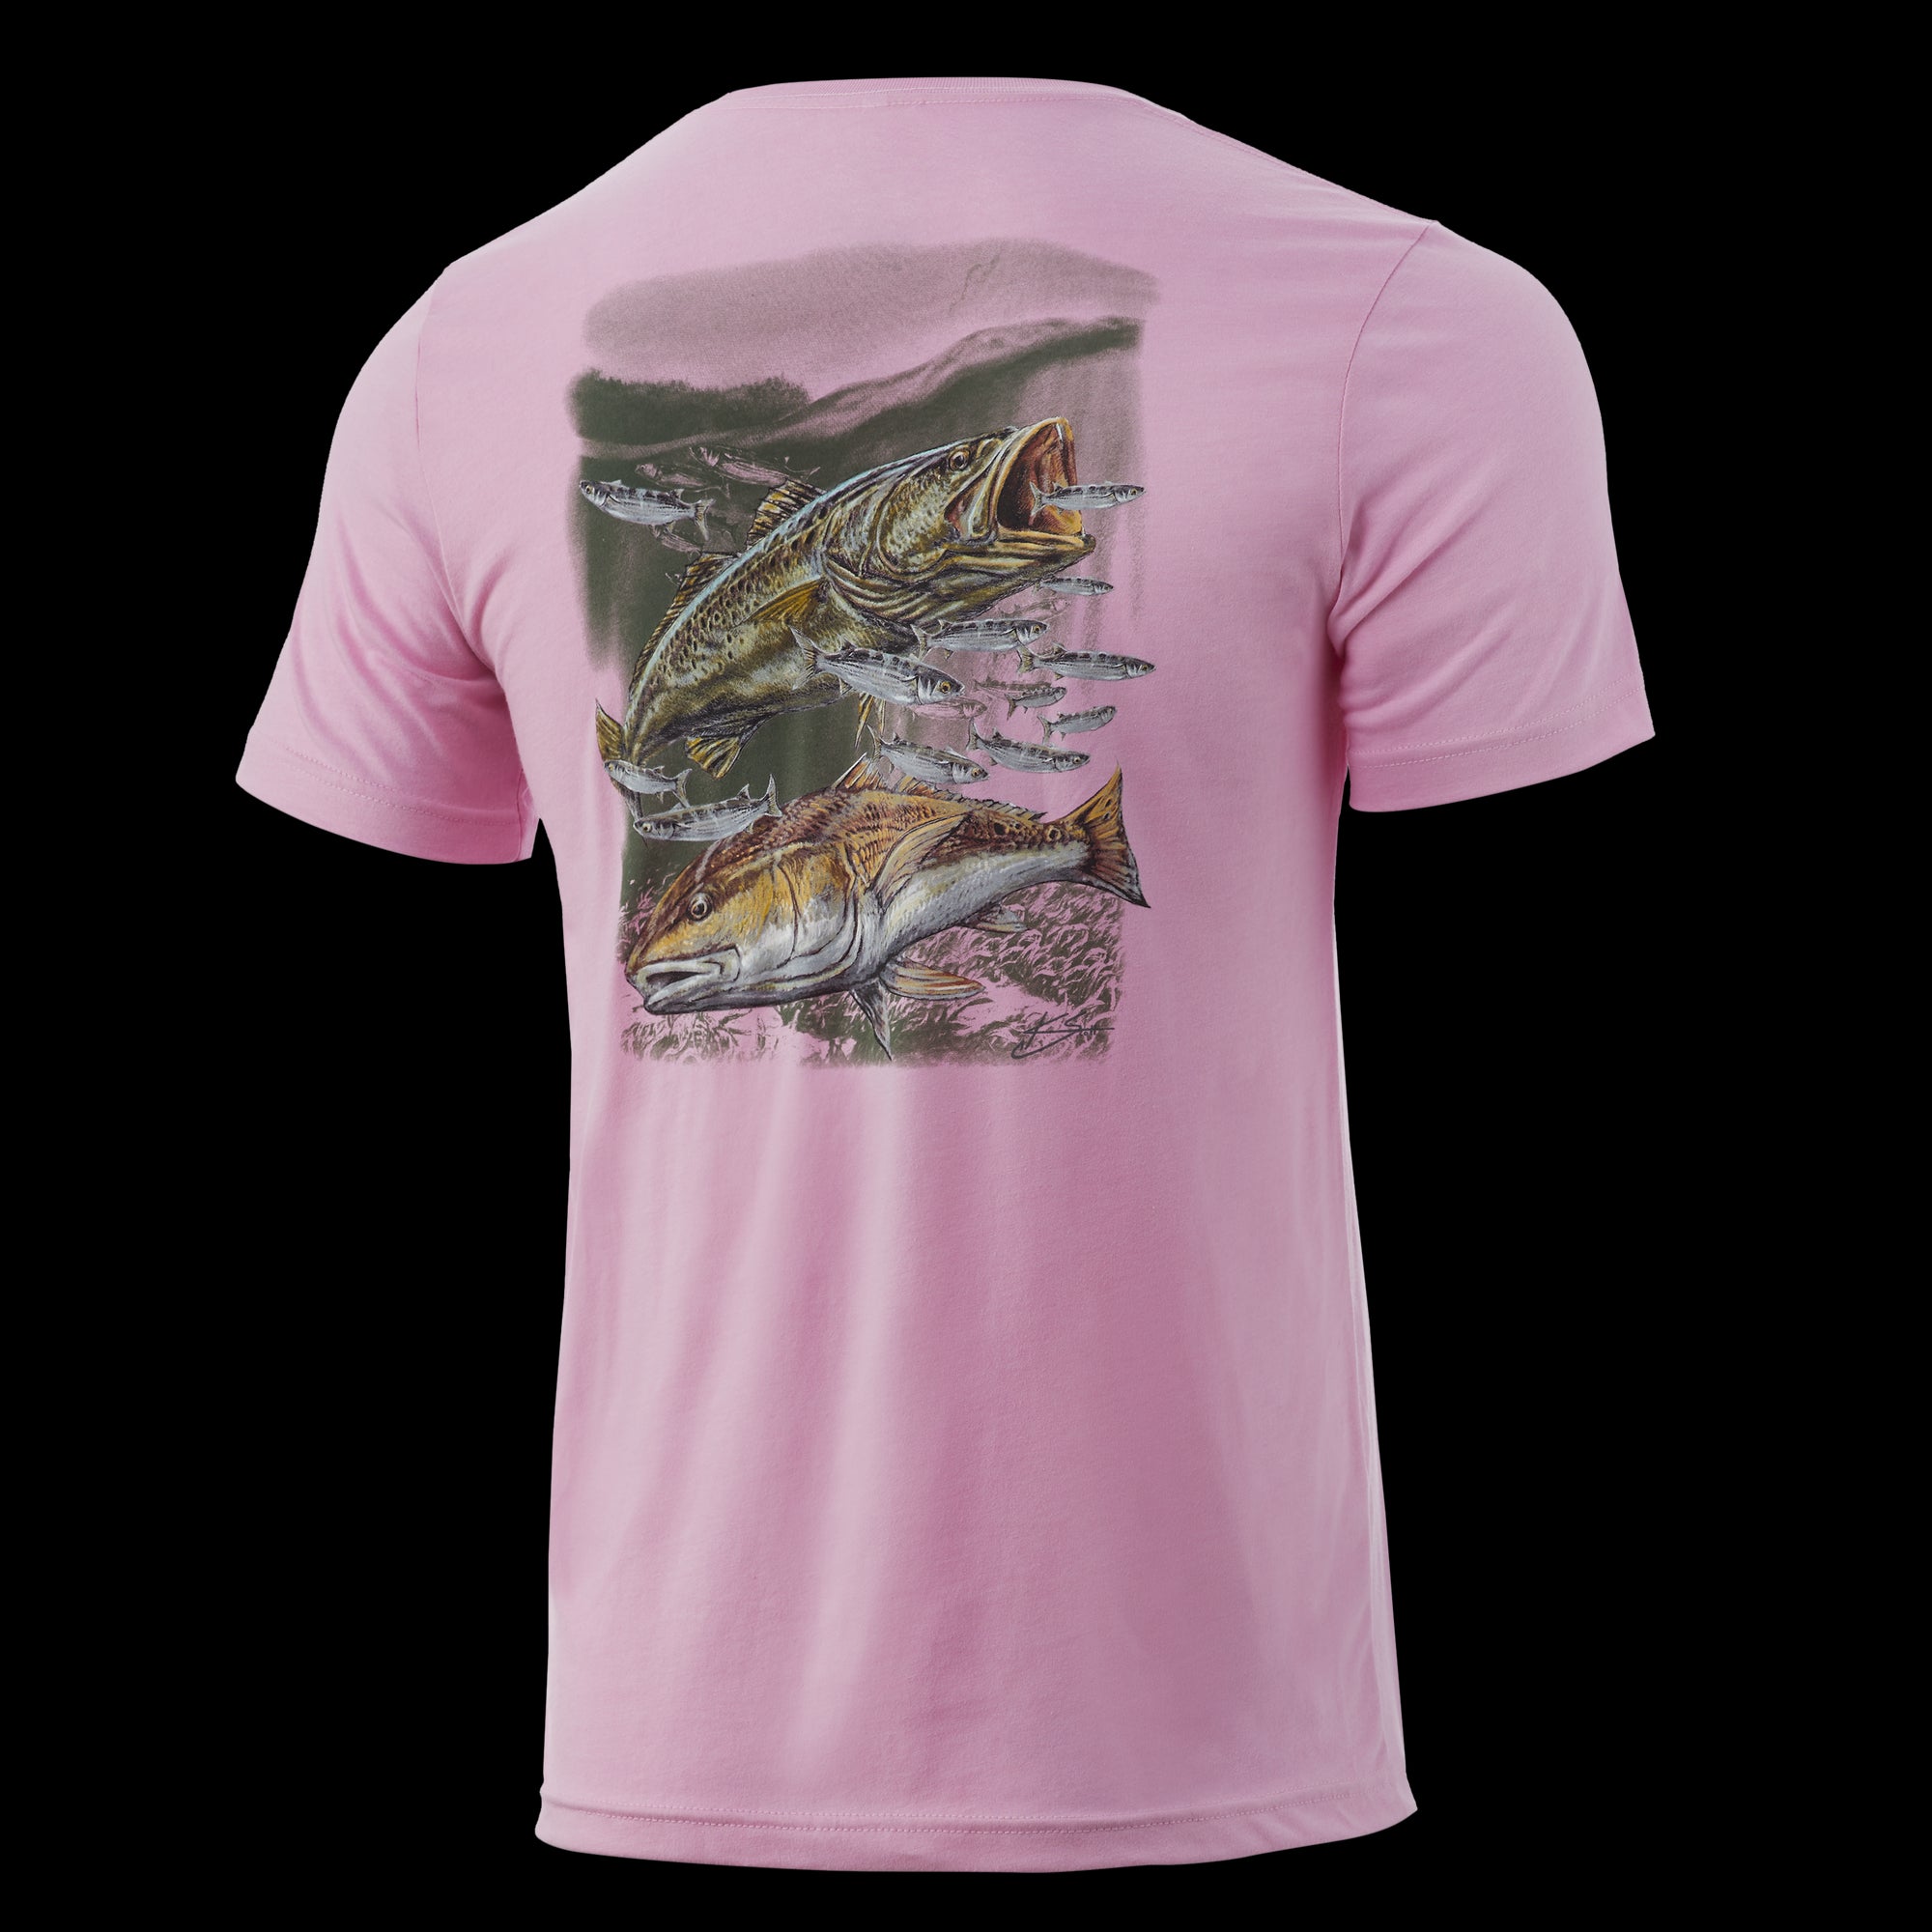 Huk KC Finger Mullet Feast Tee in Seashell Pink Heather color from the front